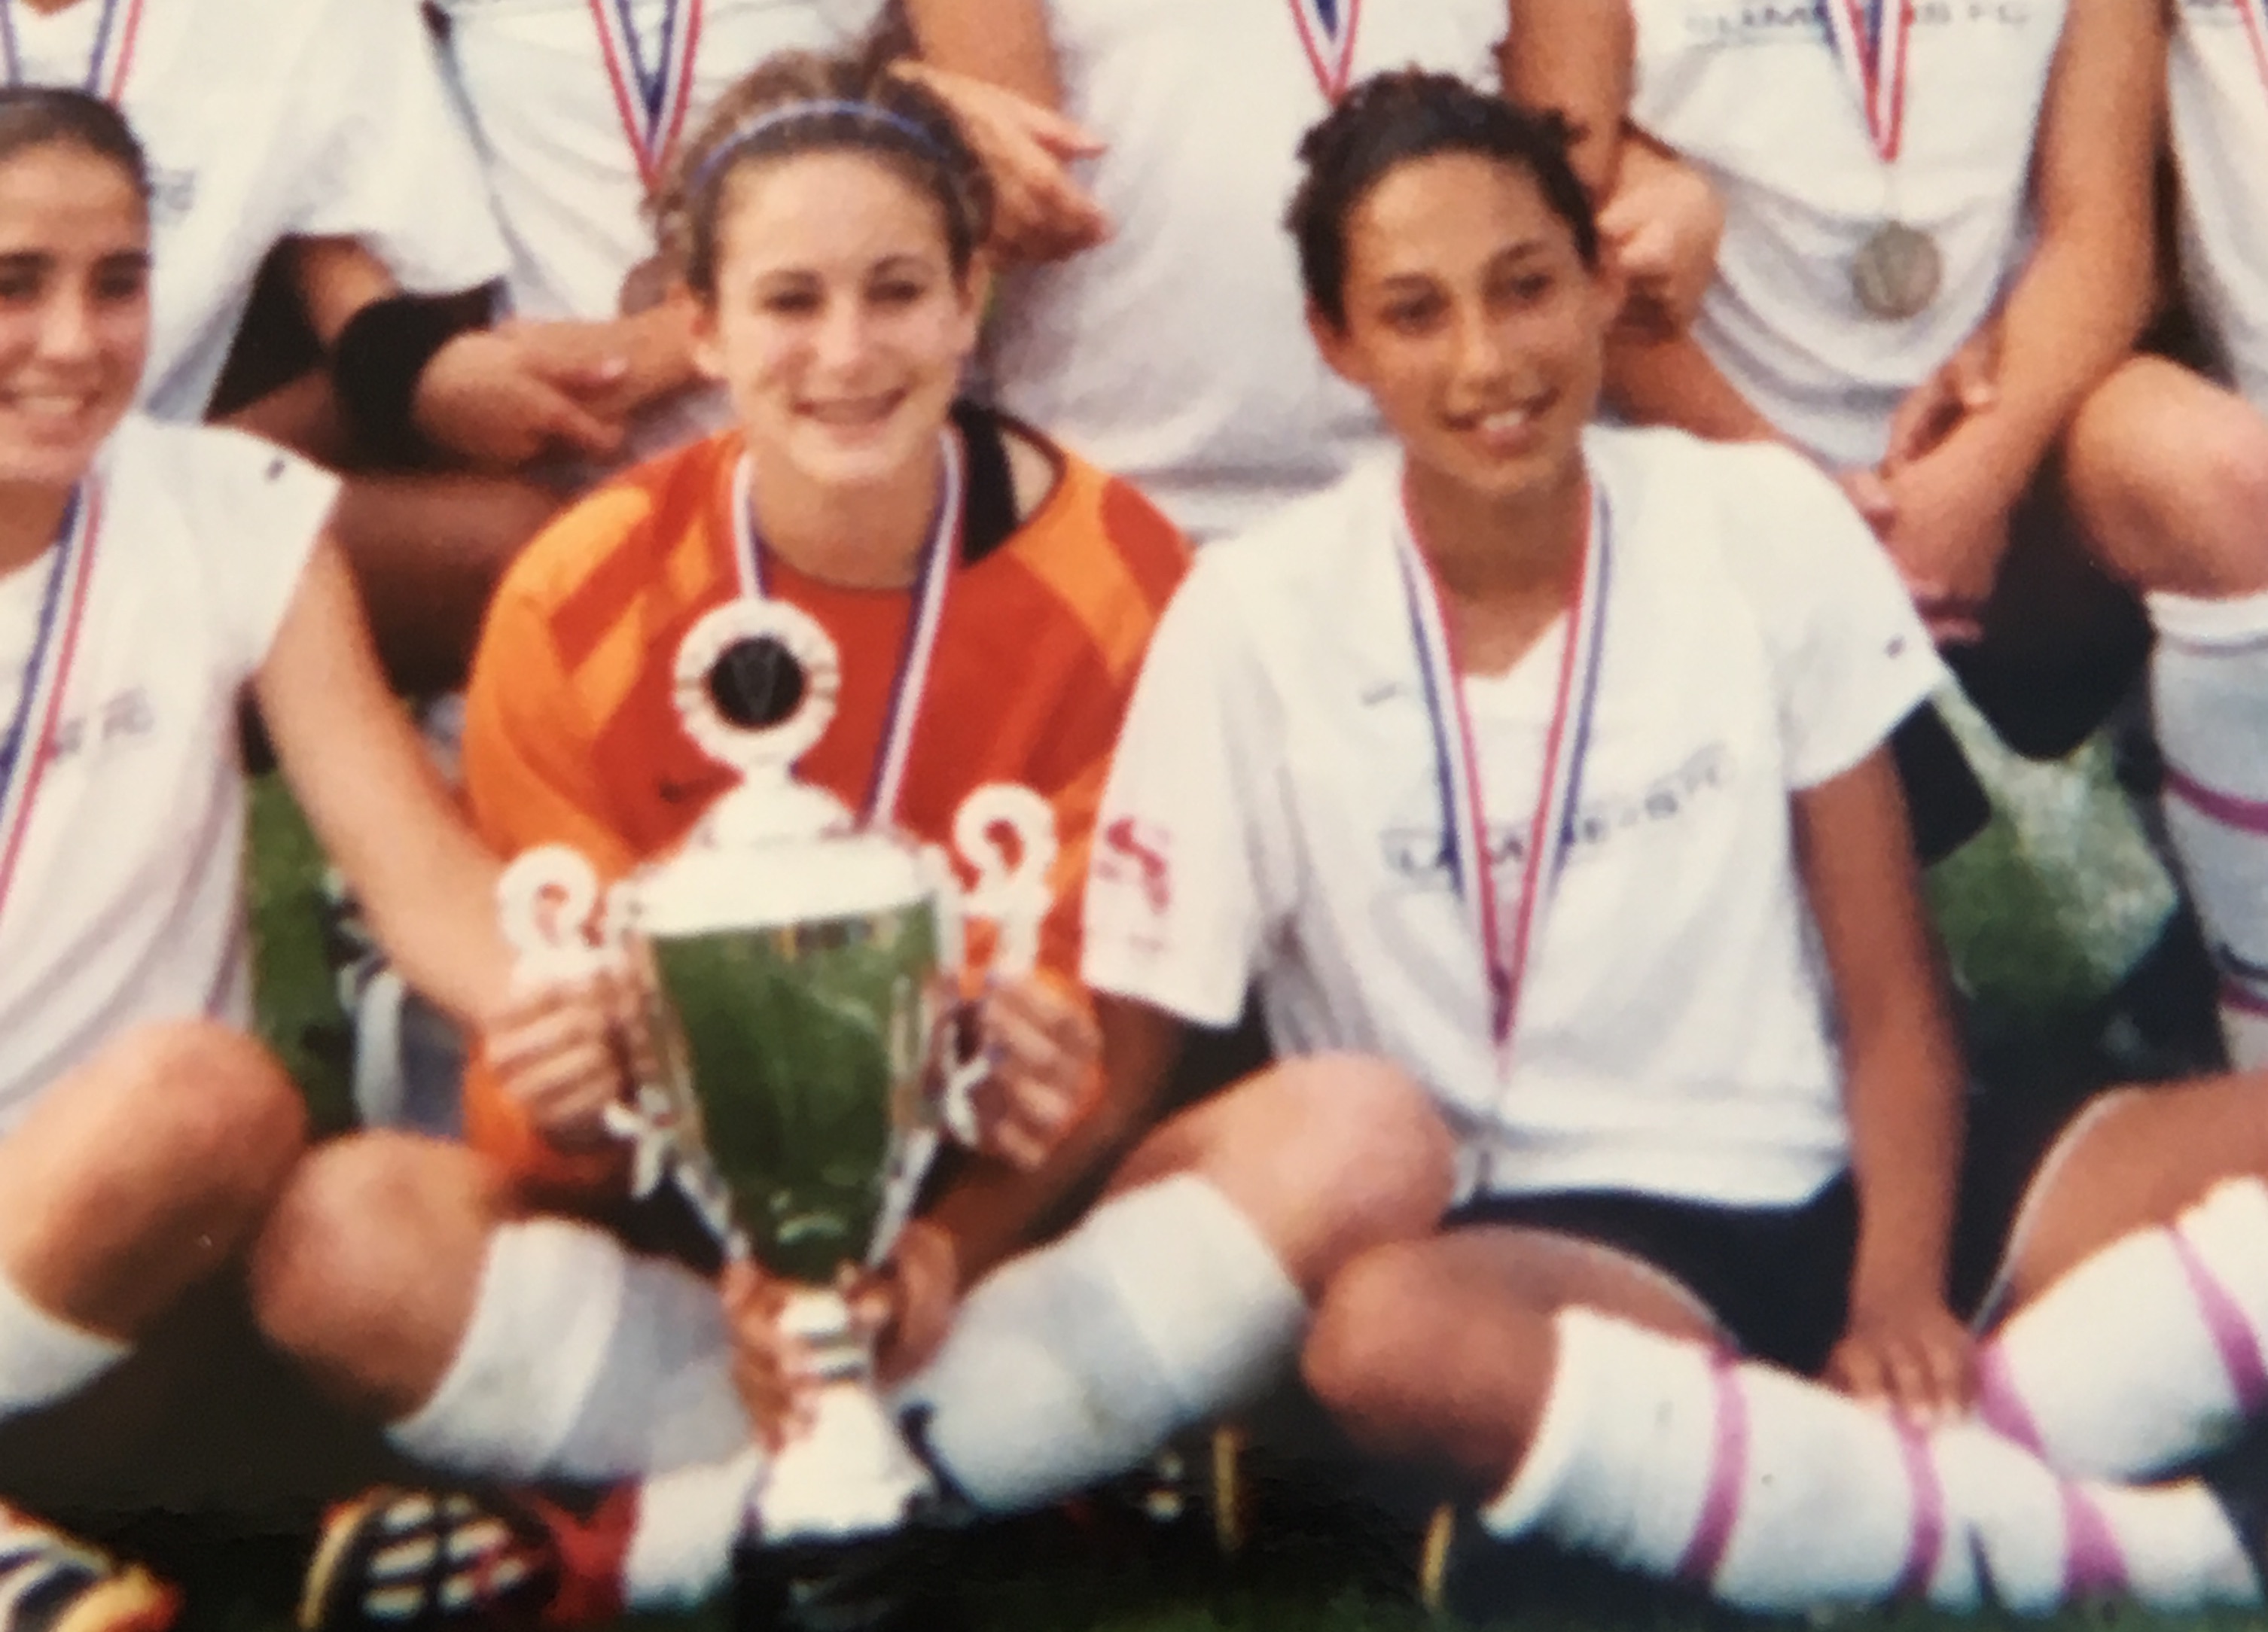 From SoCal to the World Cup: USWNT’s Christen Press